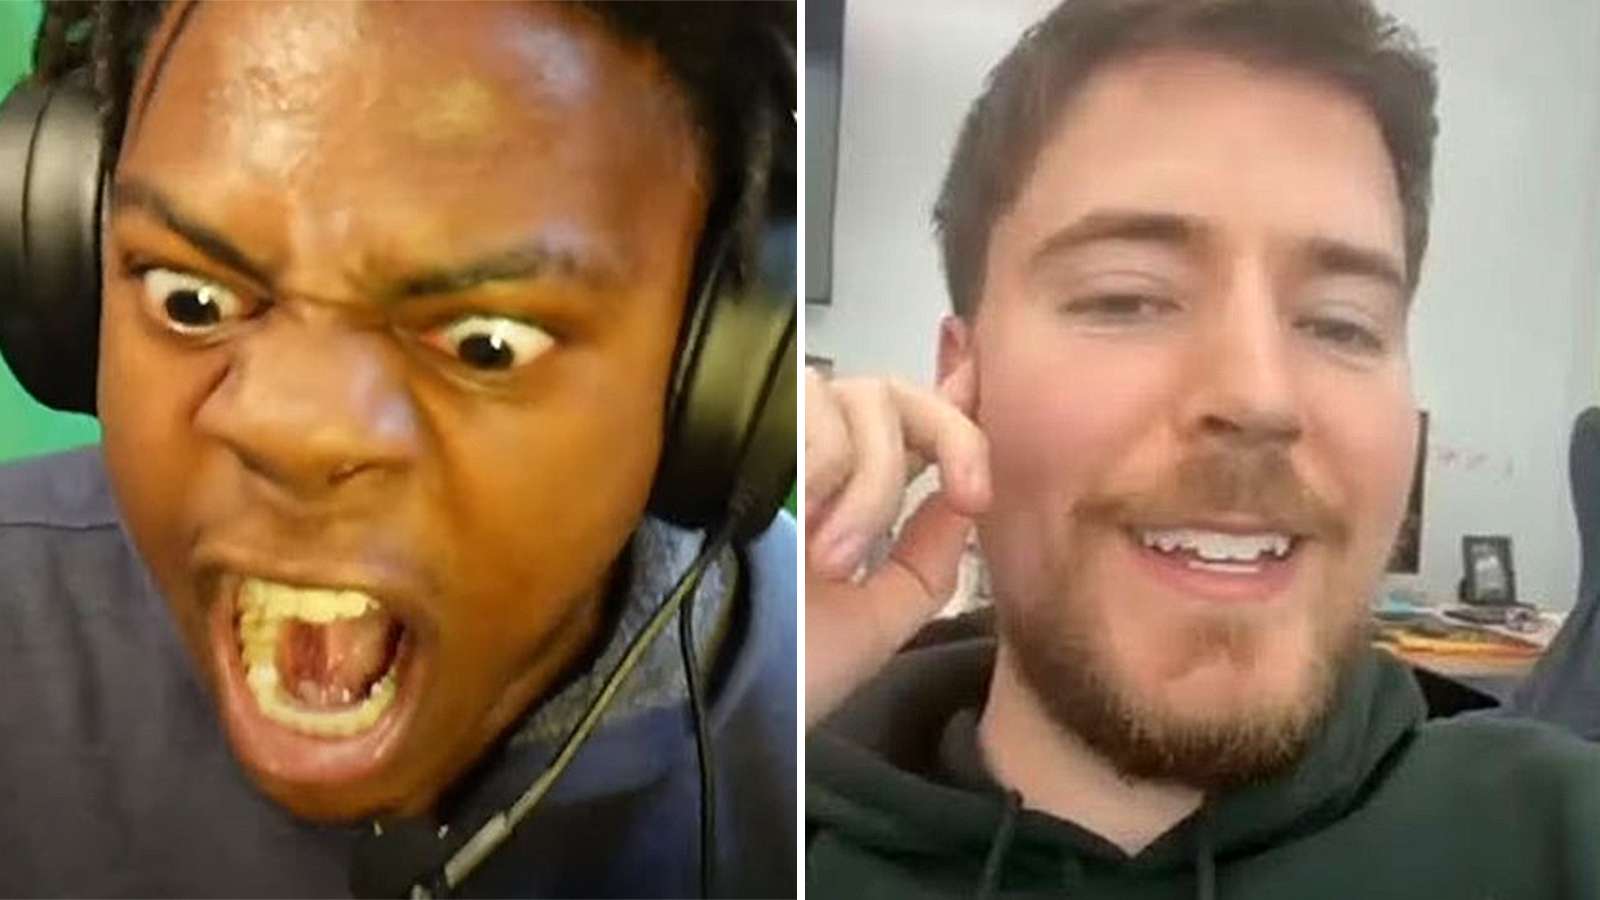 IShowSpeed and MrBeast facetime call ends in hilarious way